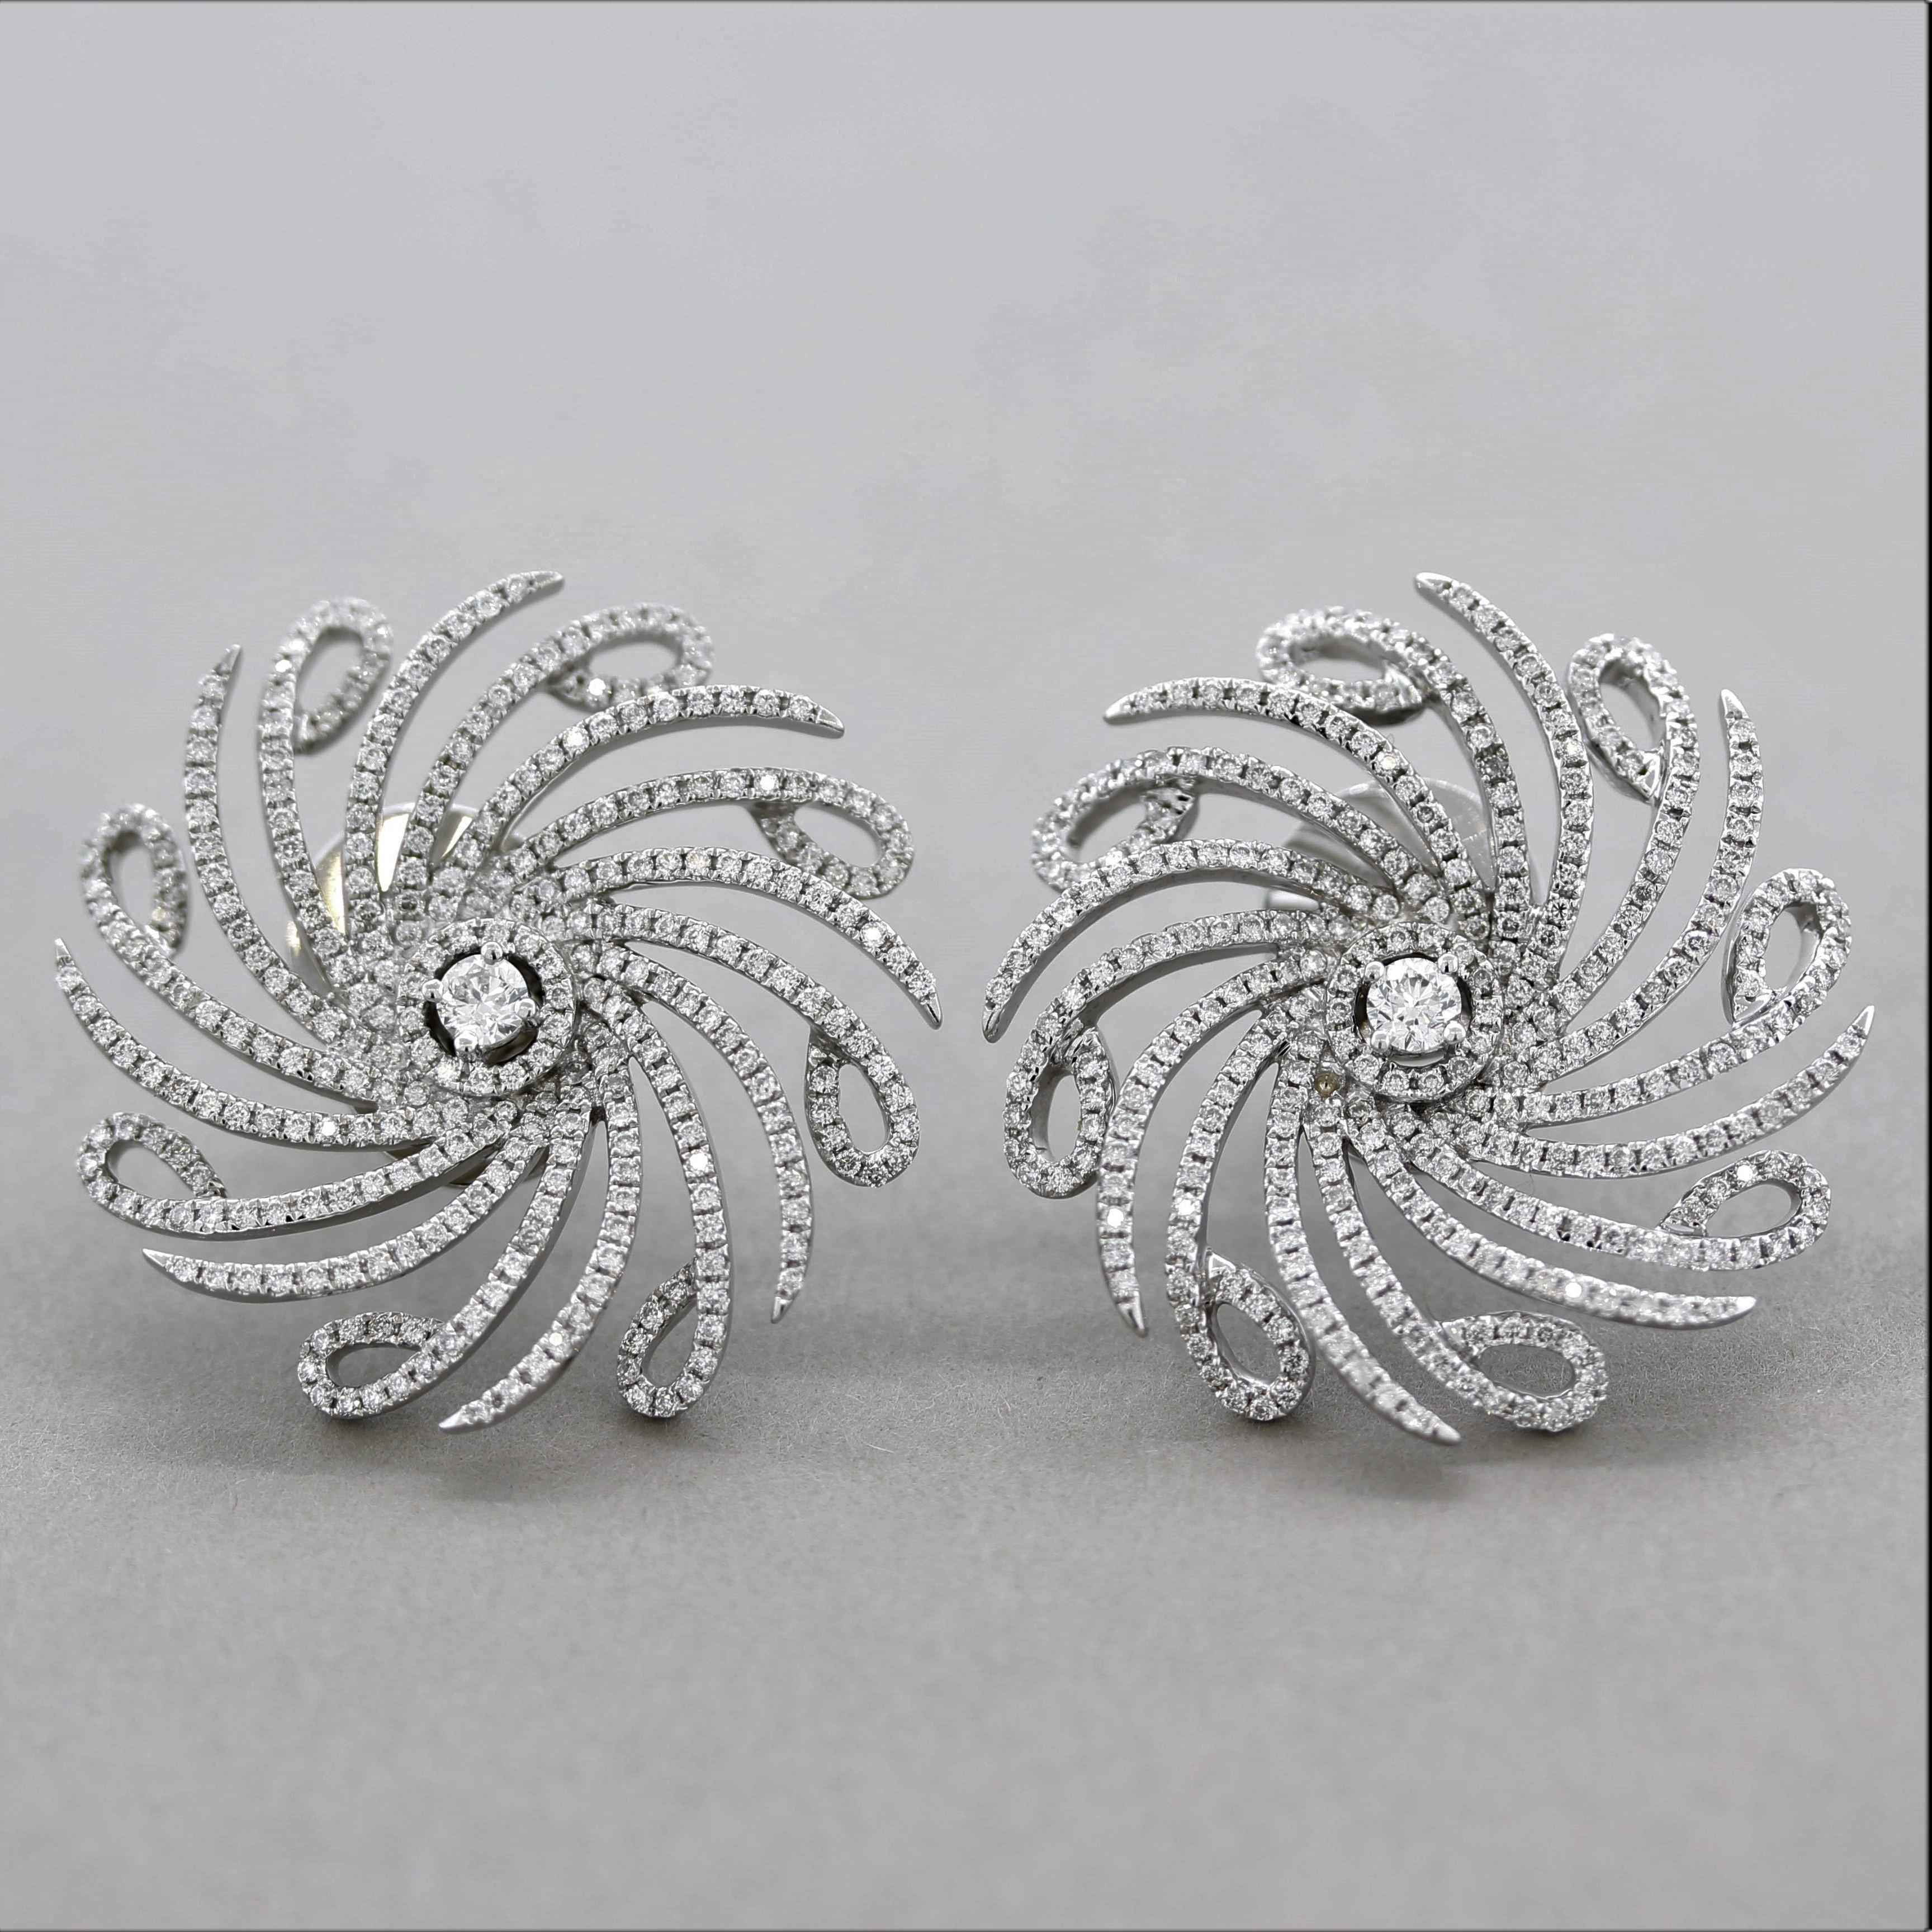 A stylish pair of diamond gold earrings! They feature 2.42 carats of round brilliant-cut diamonds set in a spiral pattern along with a larger diamond in the center of each flower. Made in 18k white gold, this stylish pair of flower earrings will